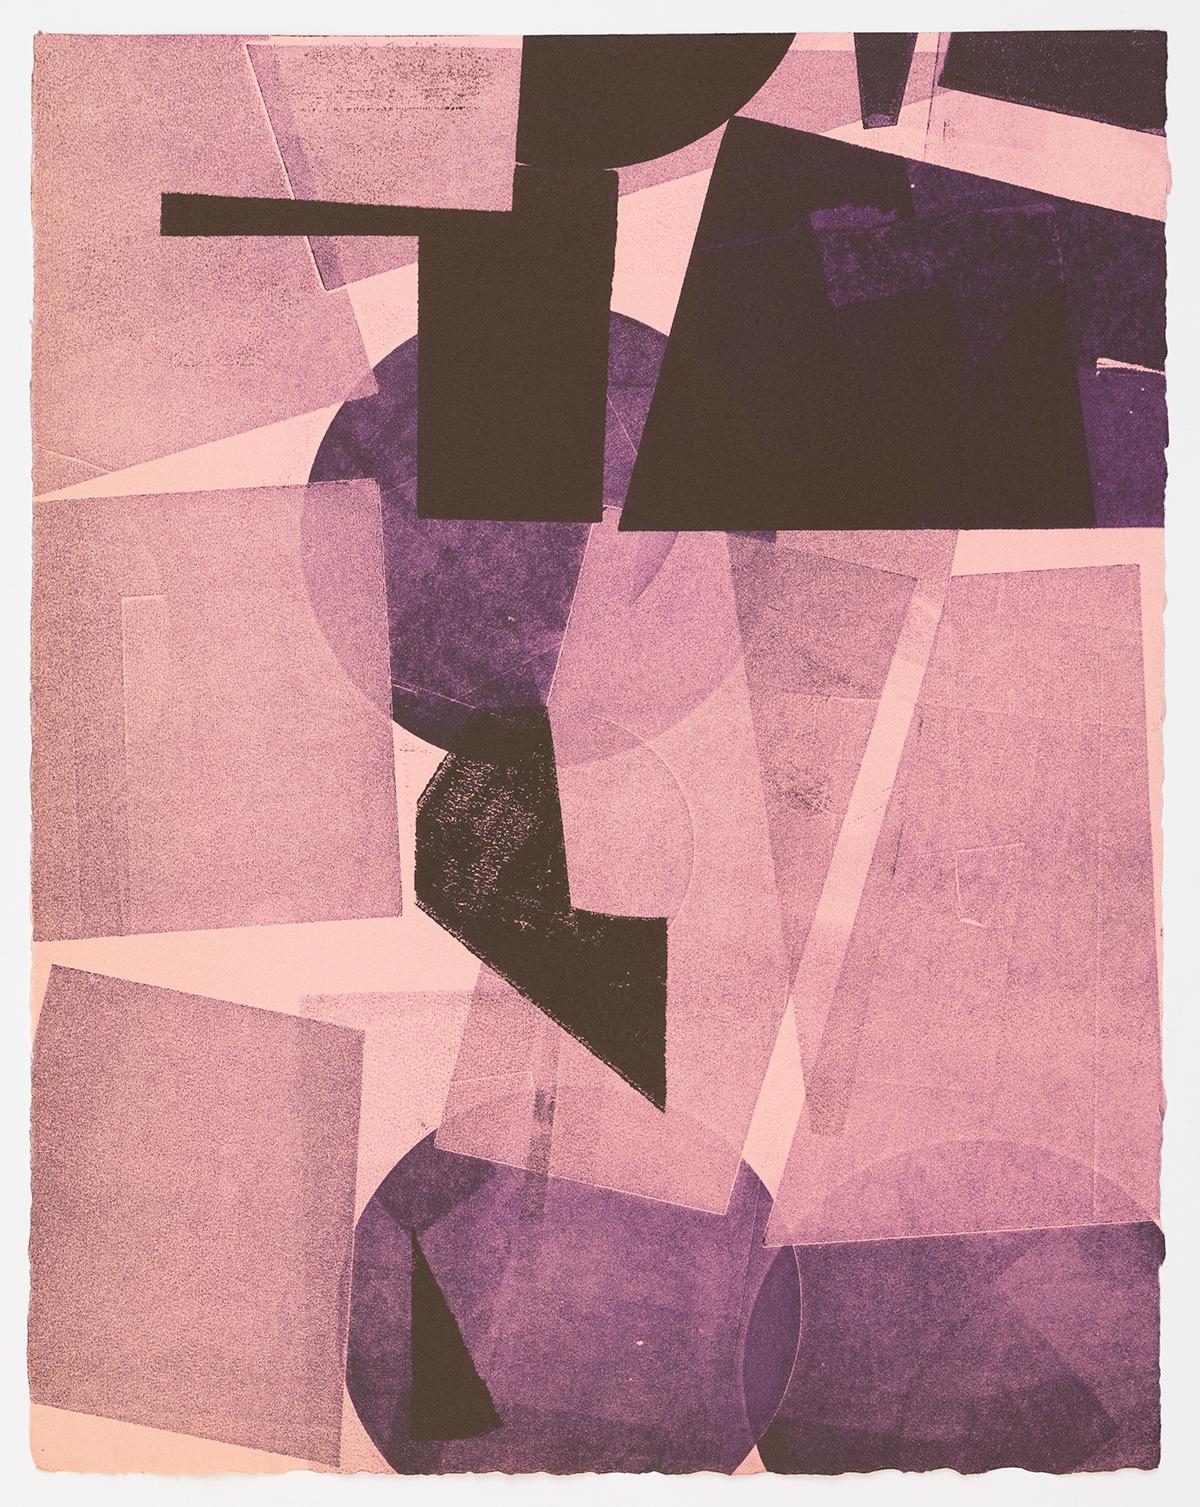 Austin Thomas Abstract Print - City of Purple and Black on Bubble-gum Pink